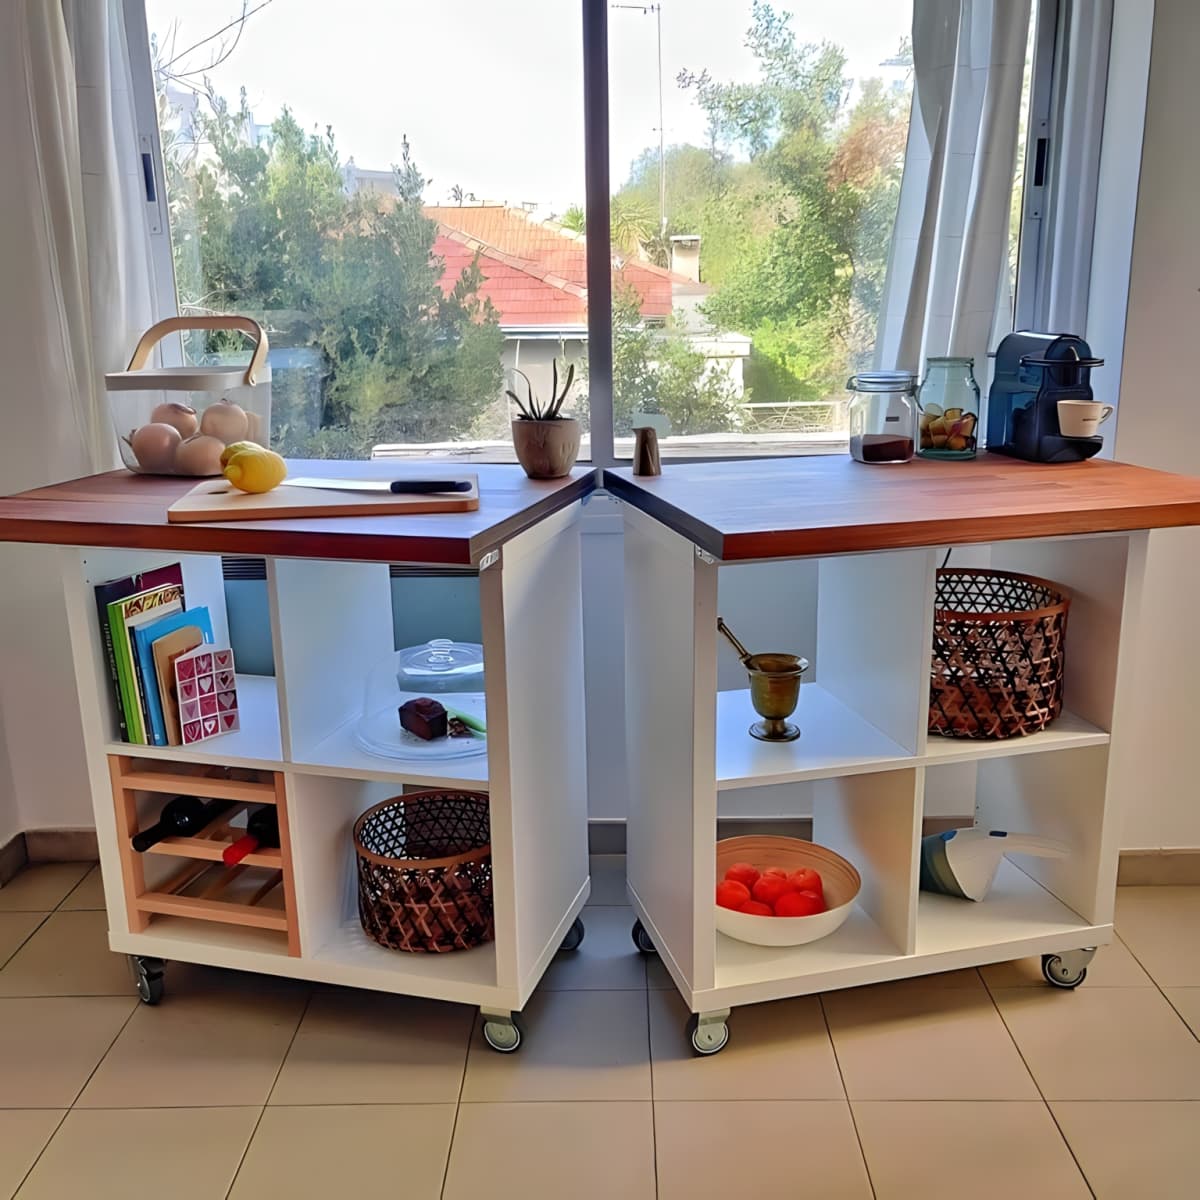 A pair of Ikea Kallax units on wheels with countertops